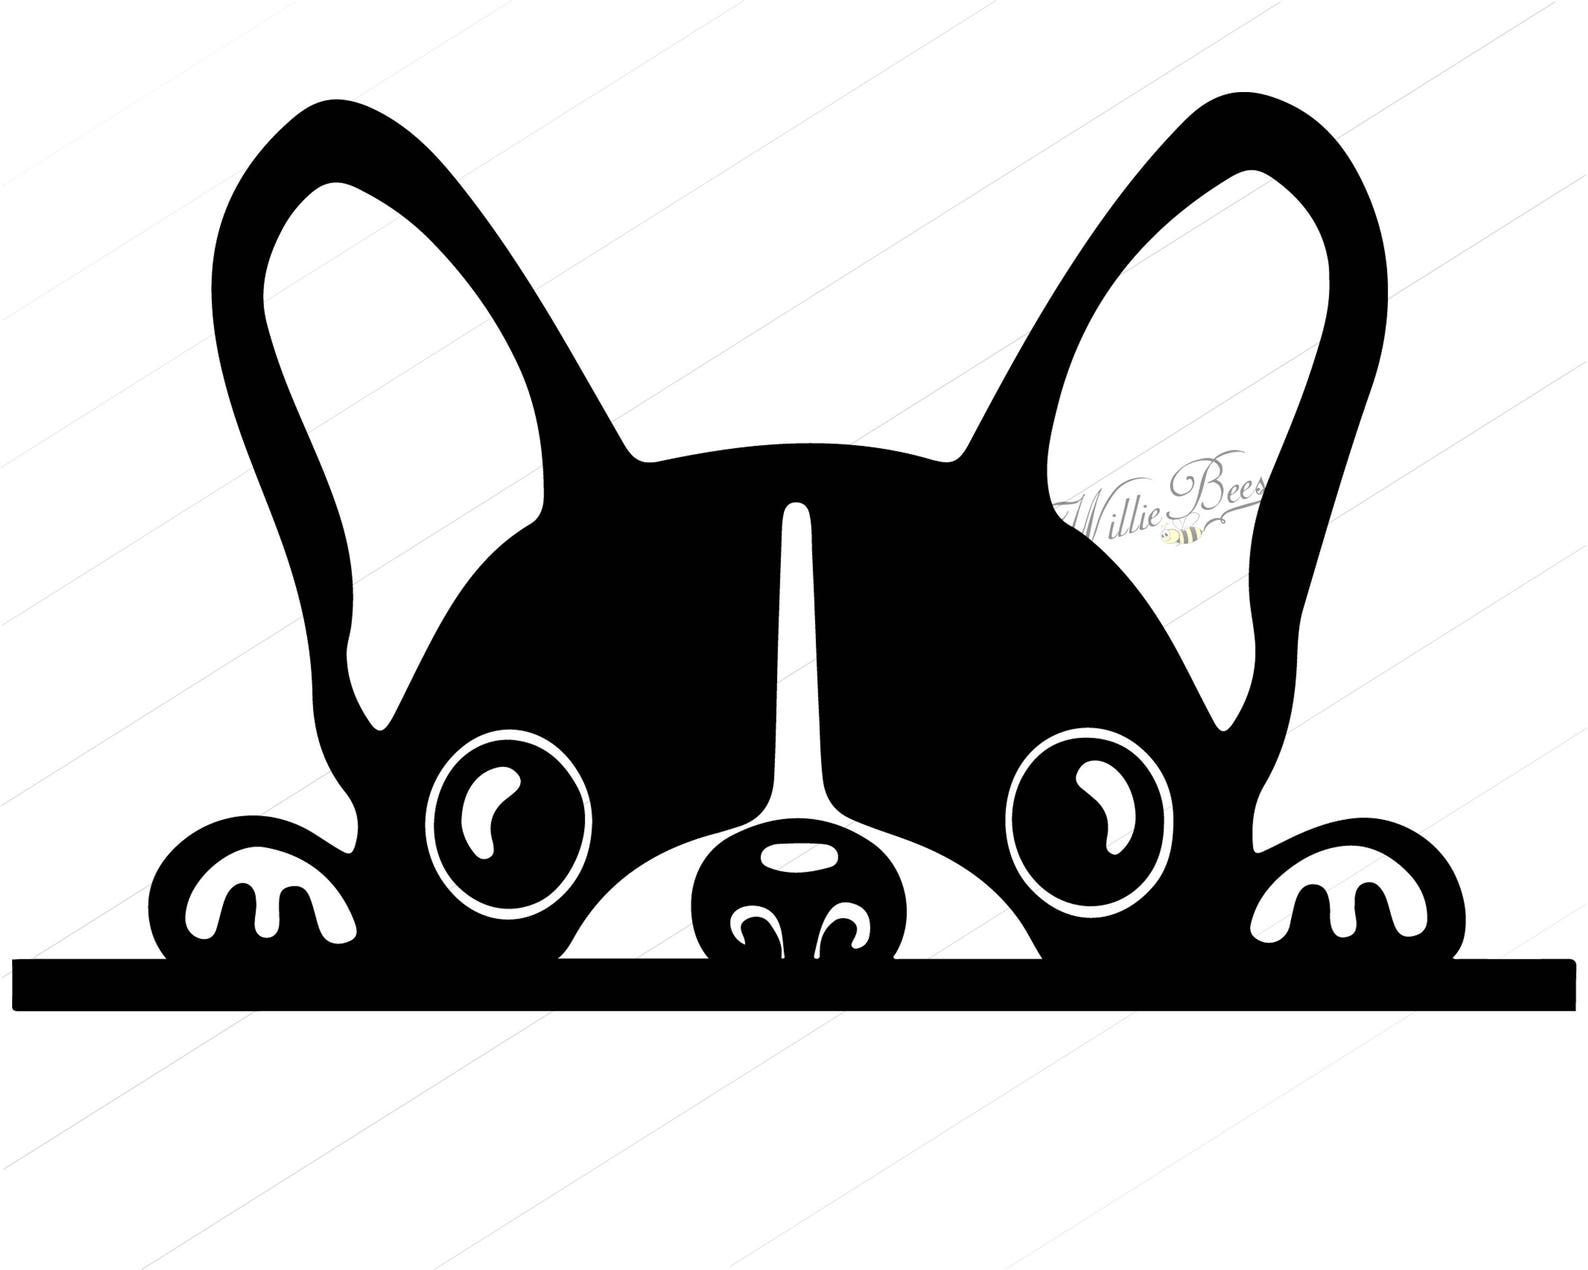 Peeking Dog SVG Silhouette Clipart Canine Clipart Image | Etsy